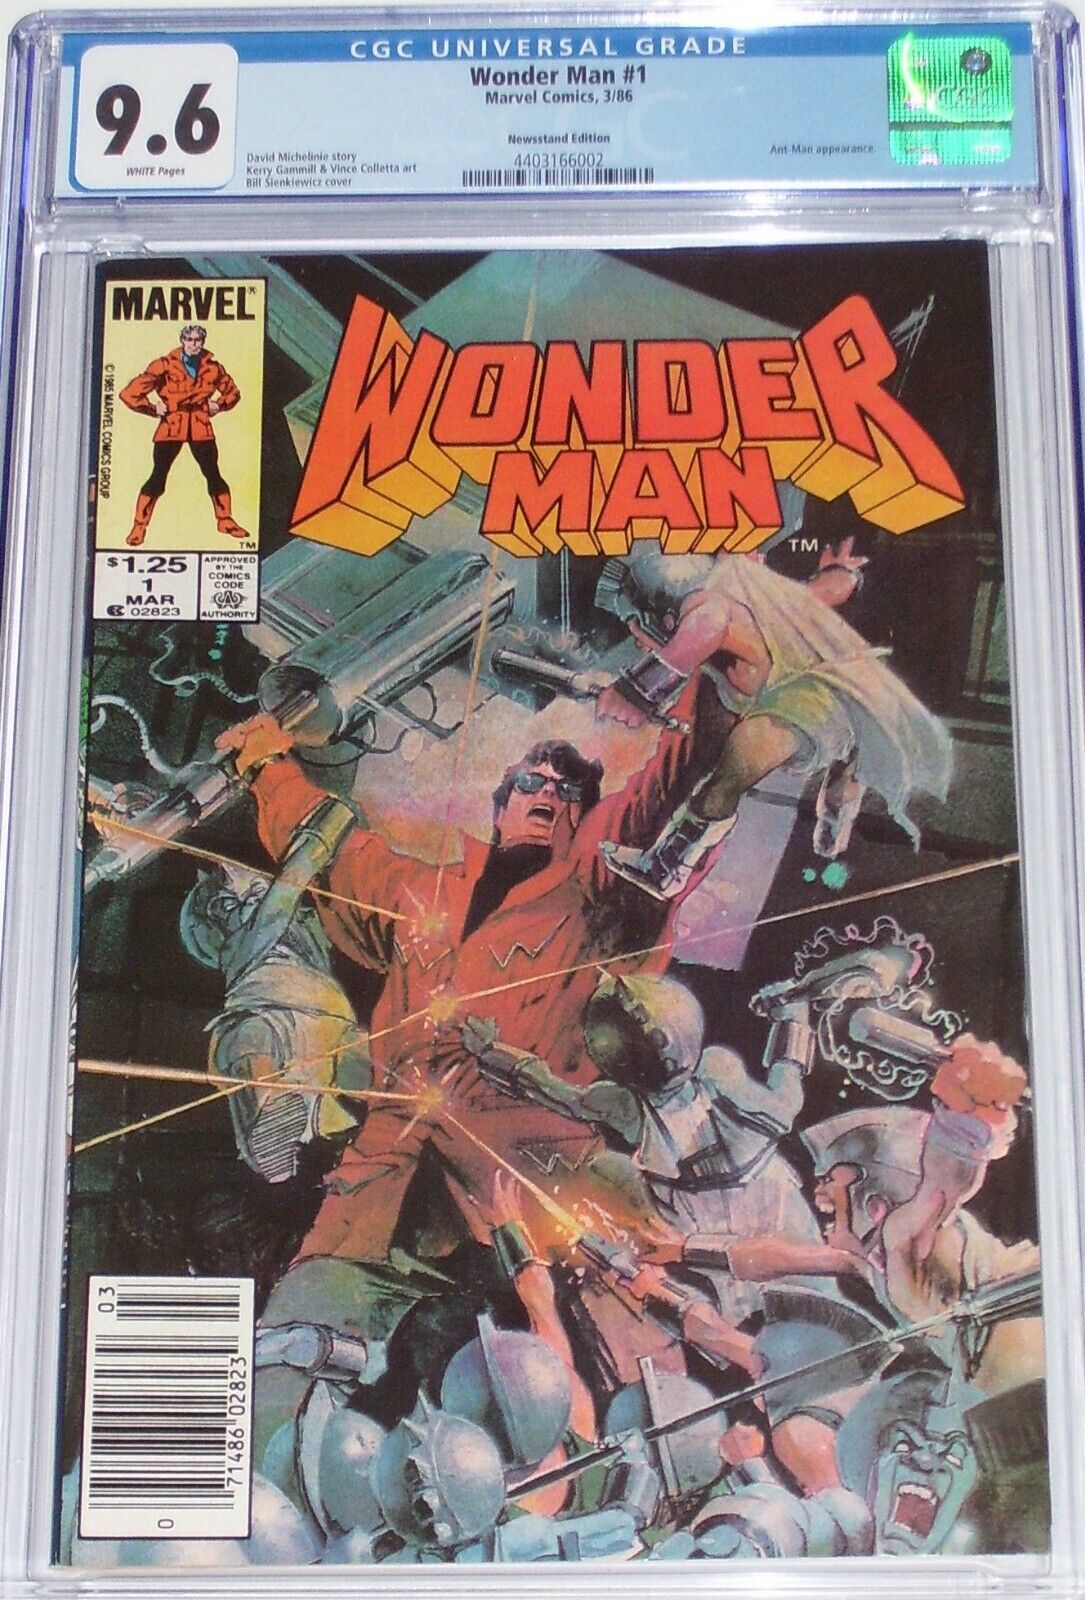 Wonder Man #1 CGC 9.6 Newsstand Edition from March 1986 Ant-Man appearance